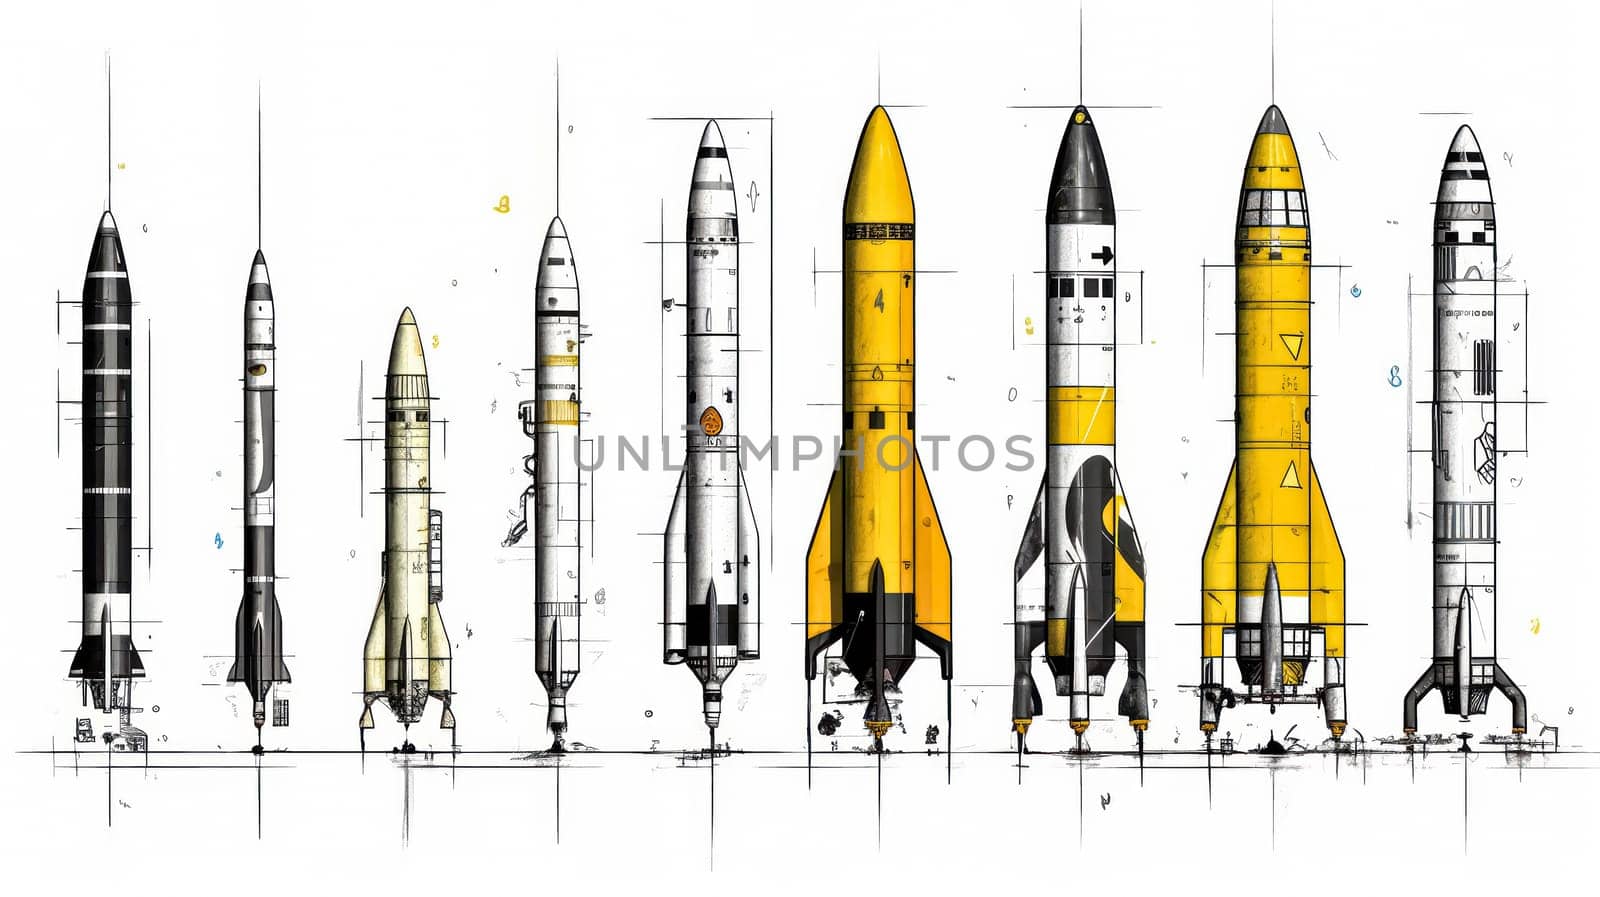 An intriguing watercolor sketch featuring rockets and shells outlined by Alla_Morozova93